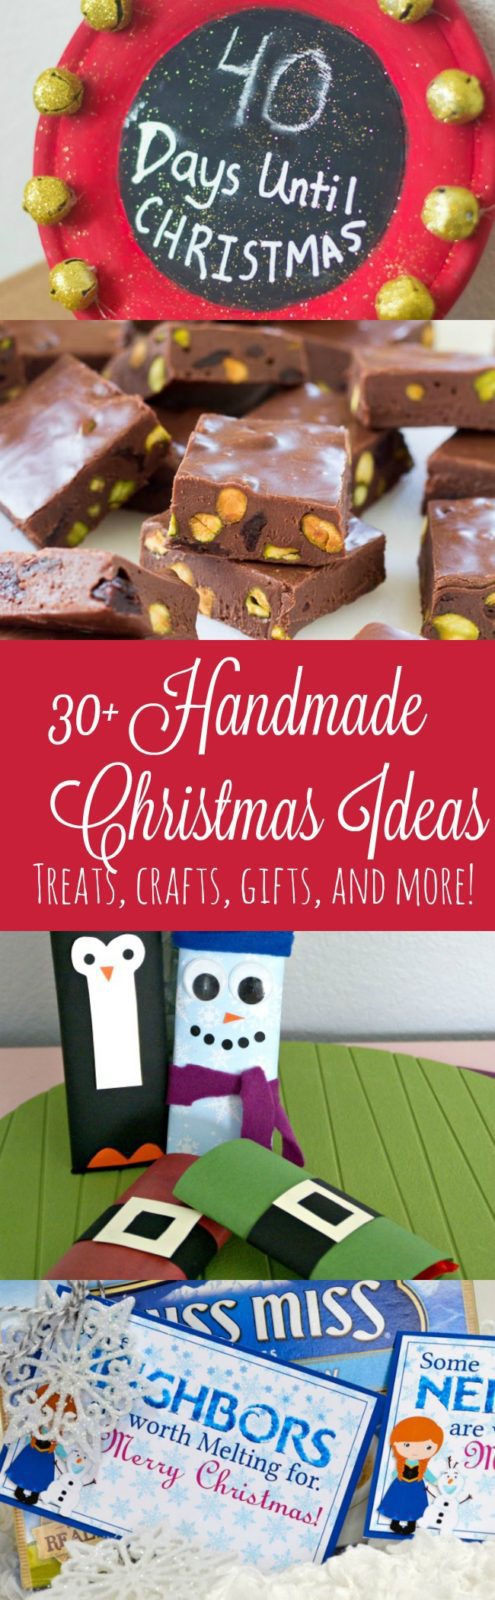 30+ Handmade Christmas Ideas - these are so fun and easy!